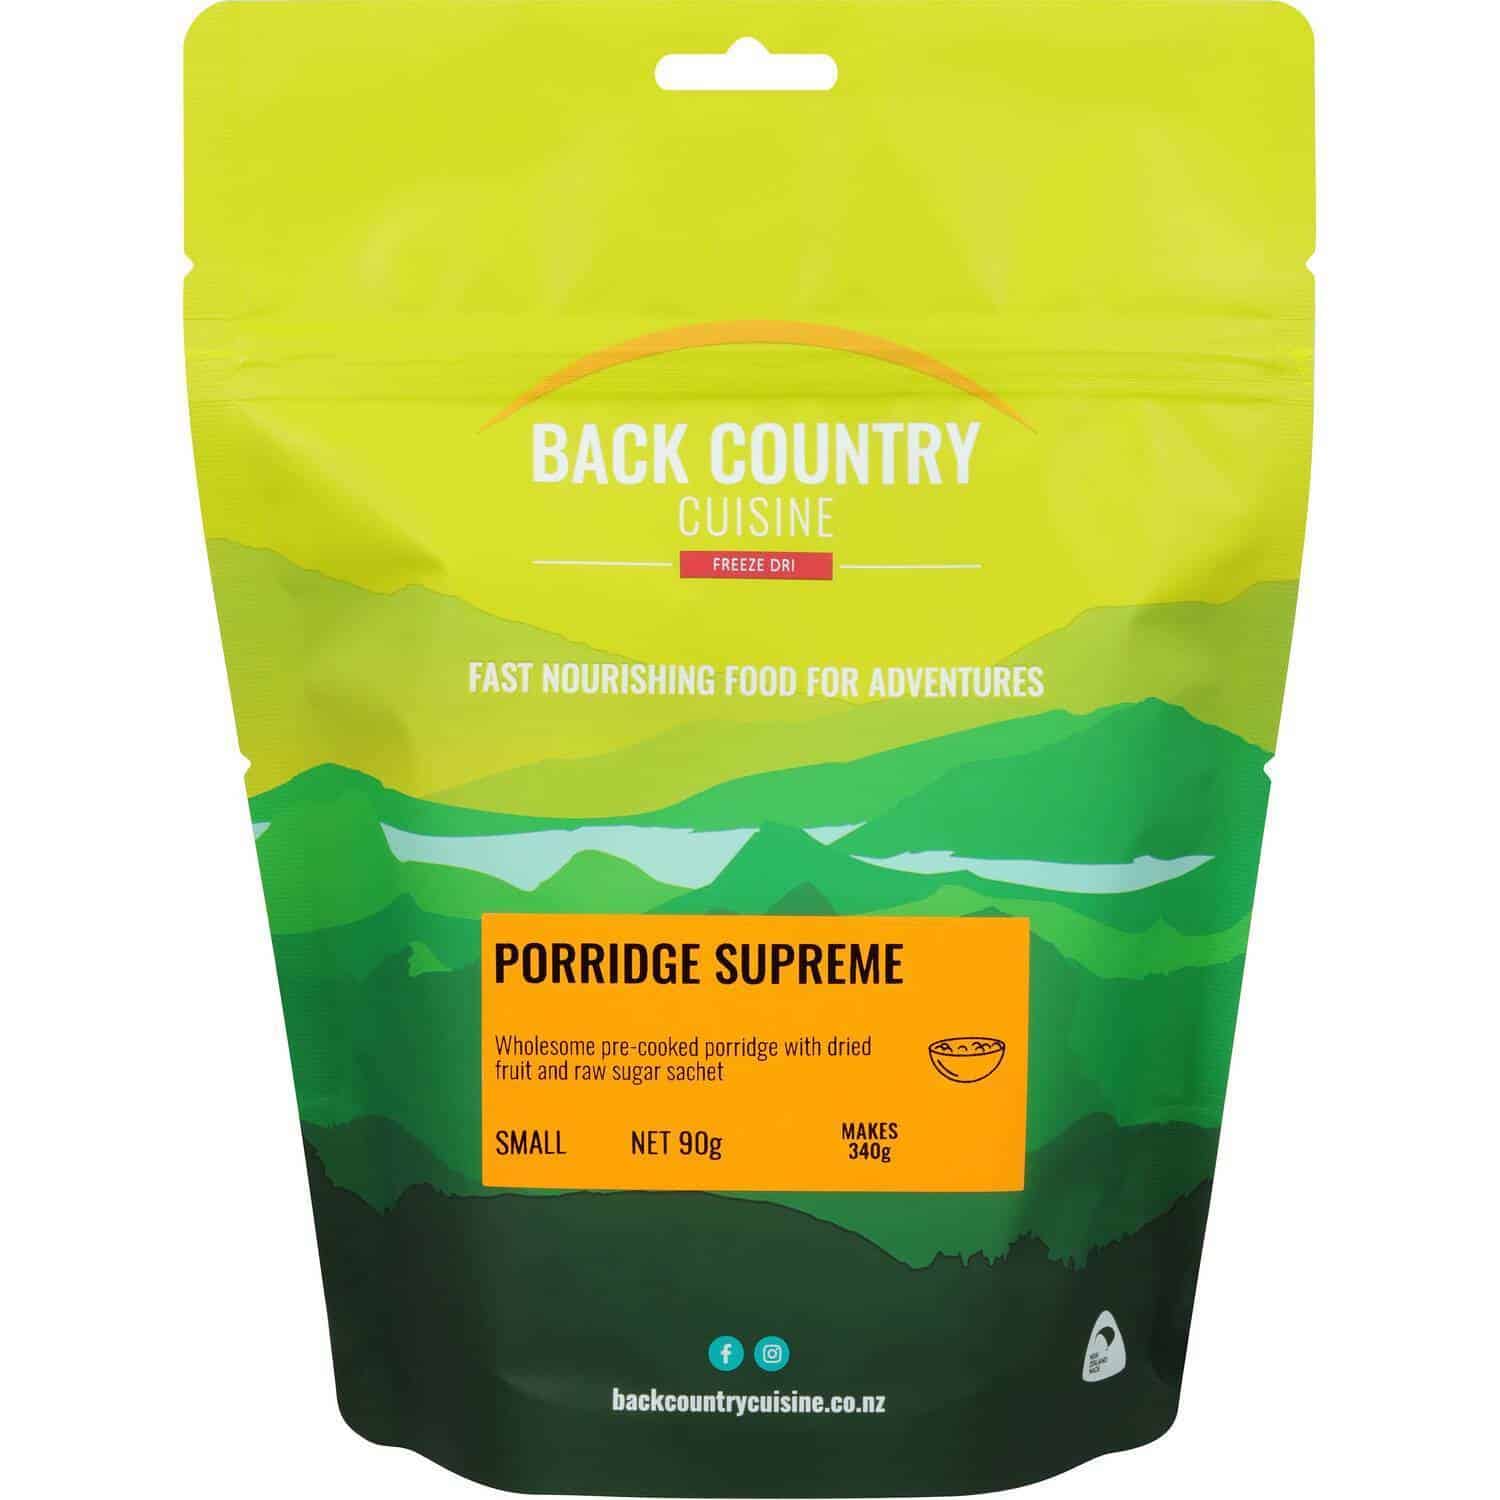 Back Country Cuisine Porridge Supreme Small - Tramping Food and Accessories sold by Venture Outdoors NZ